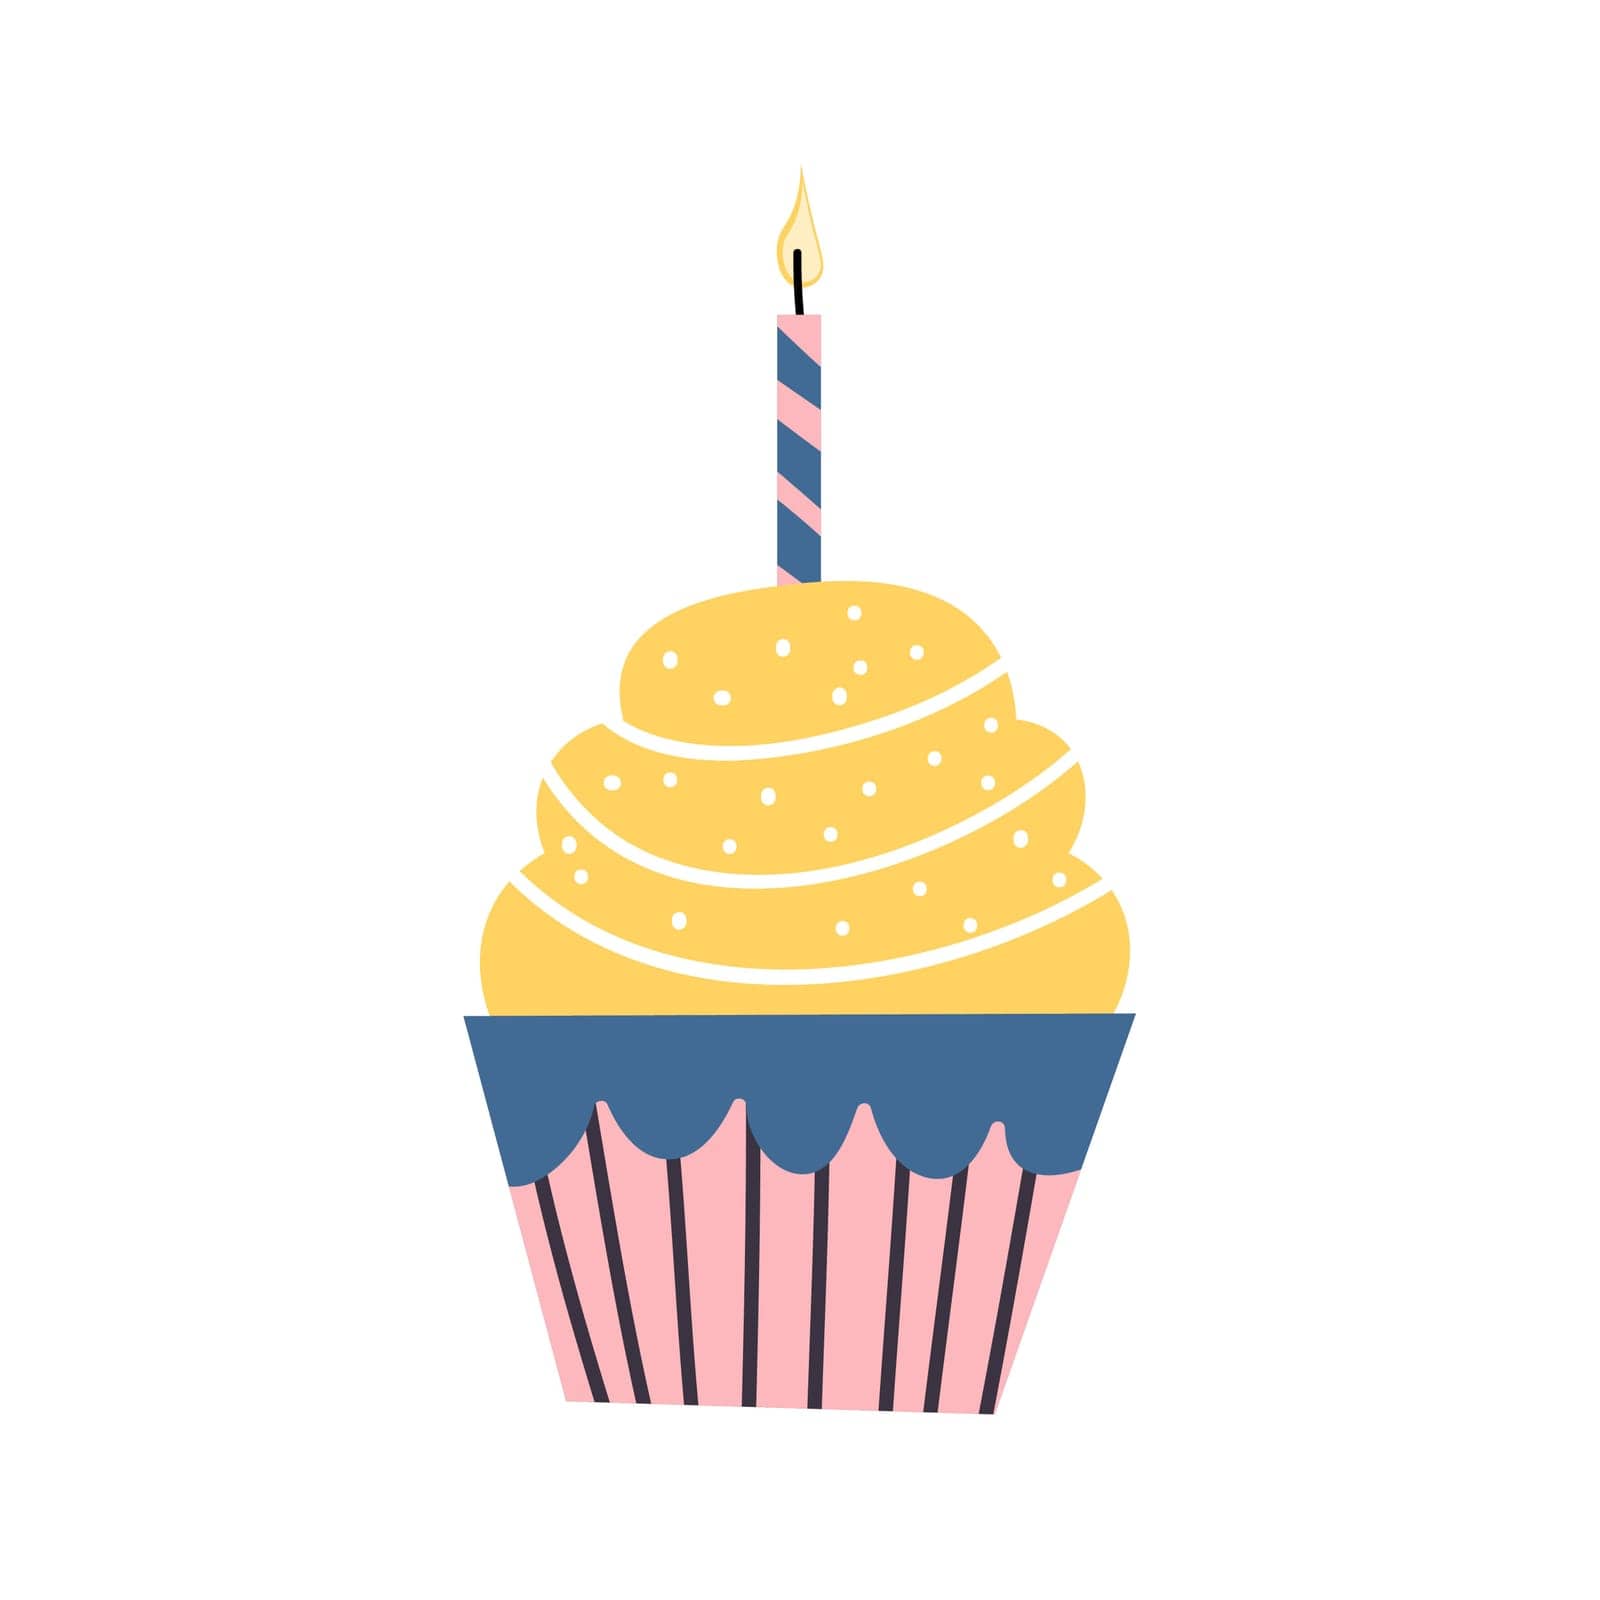 Cupcake with a candle on a birthday, flat. Vector illustration.